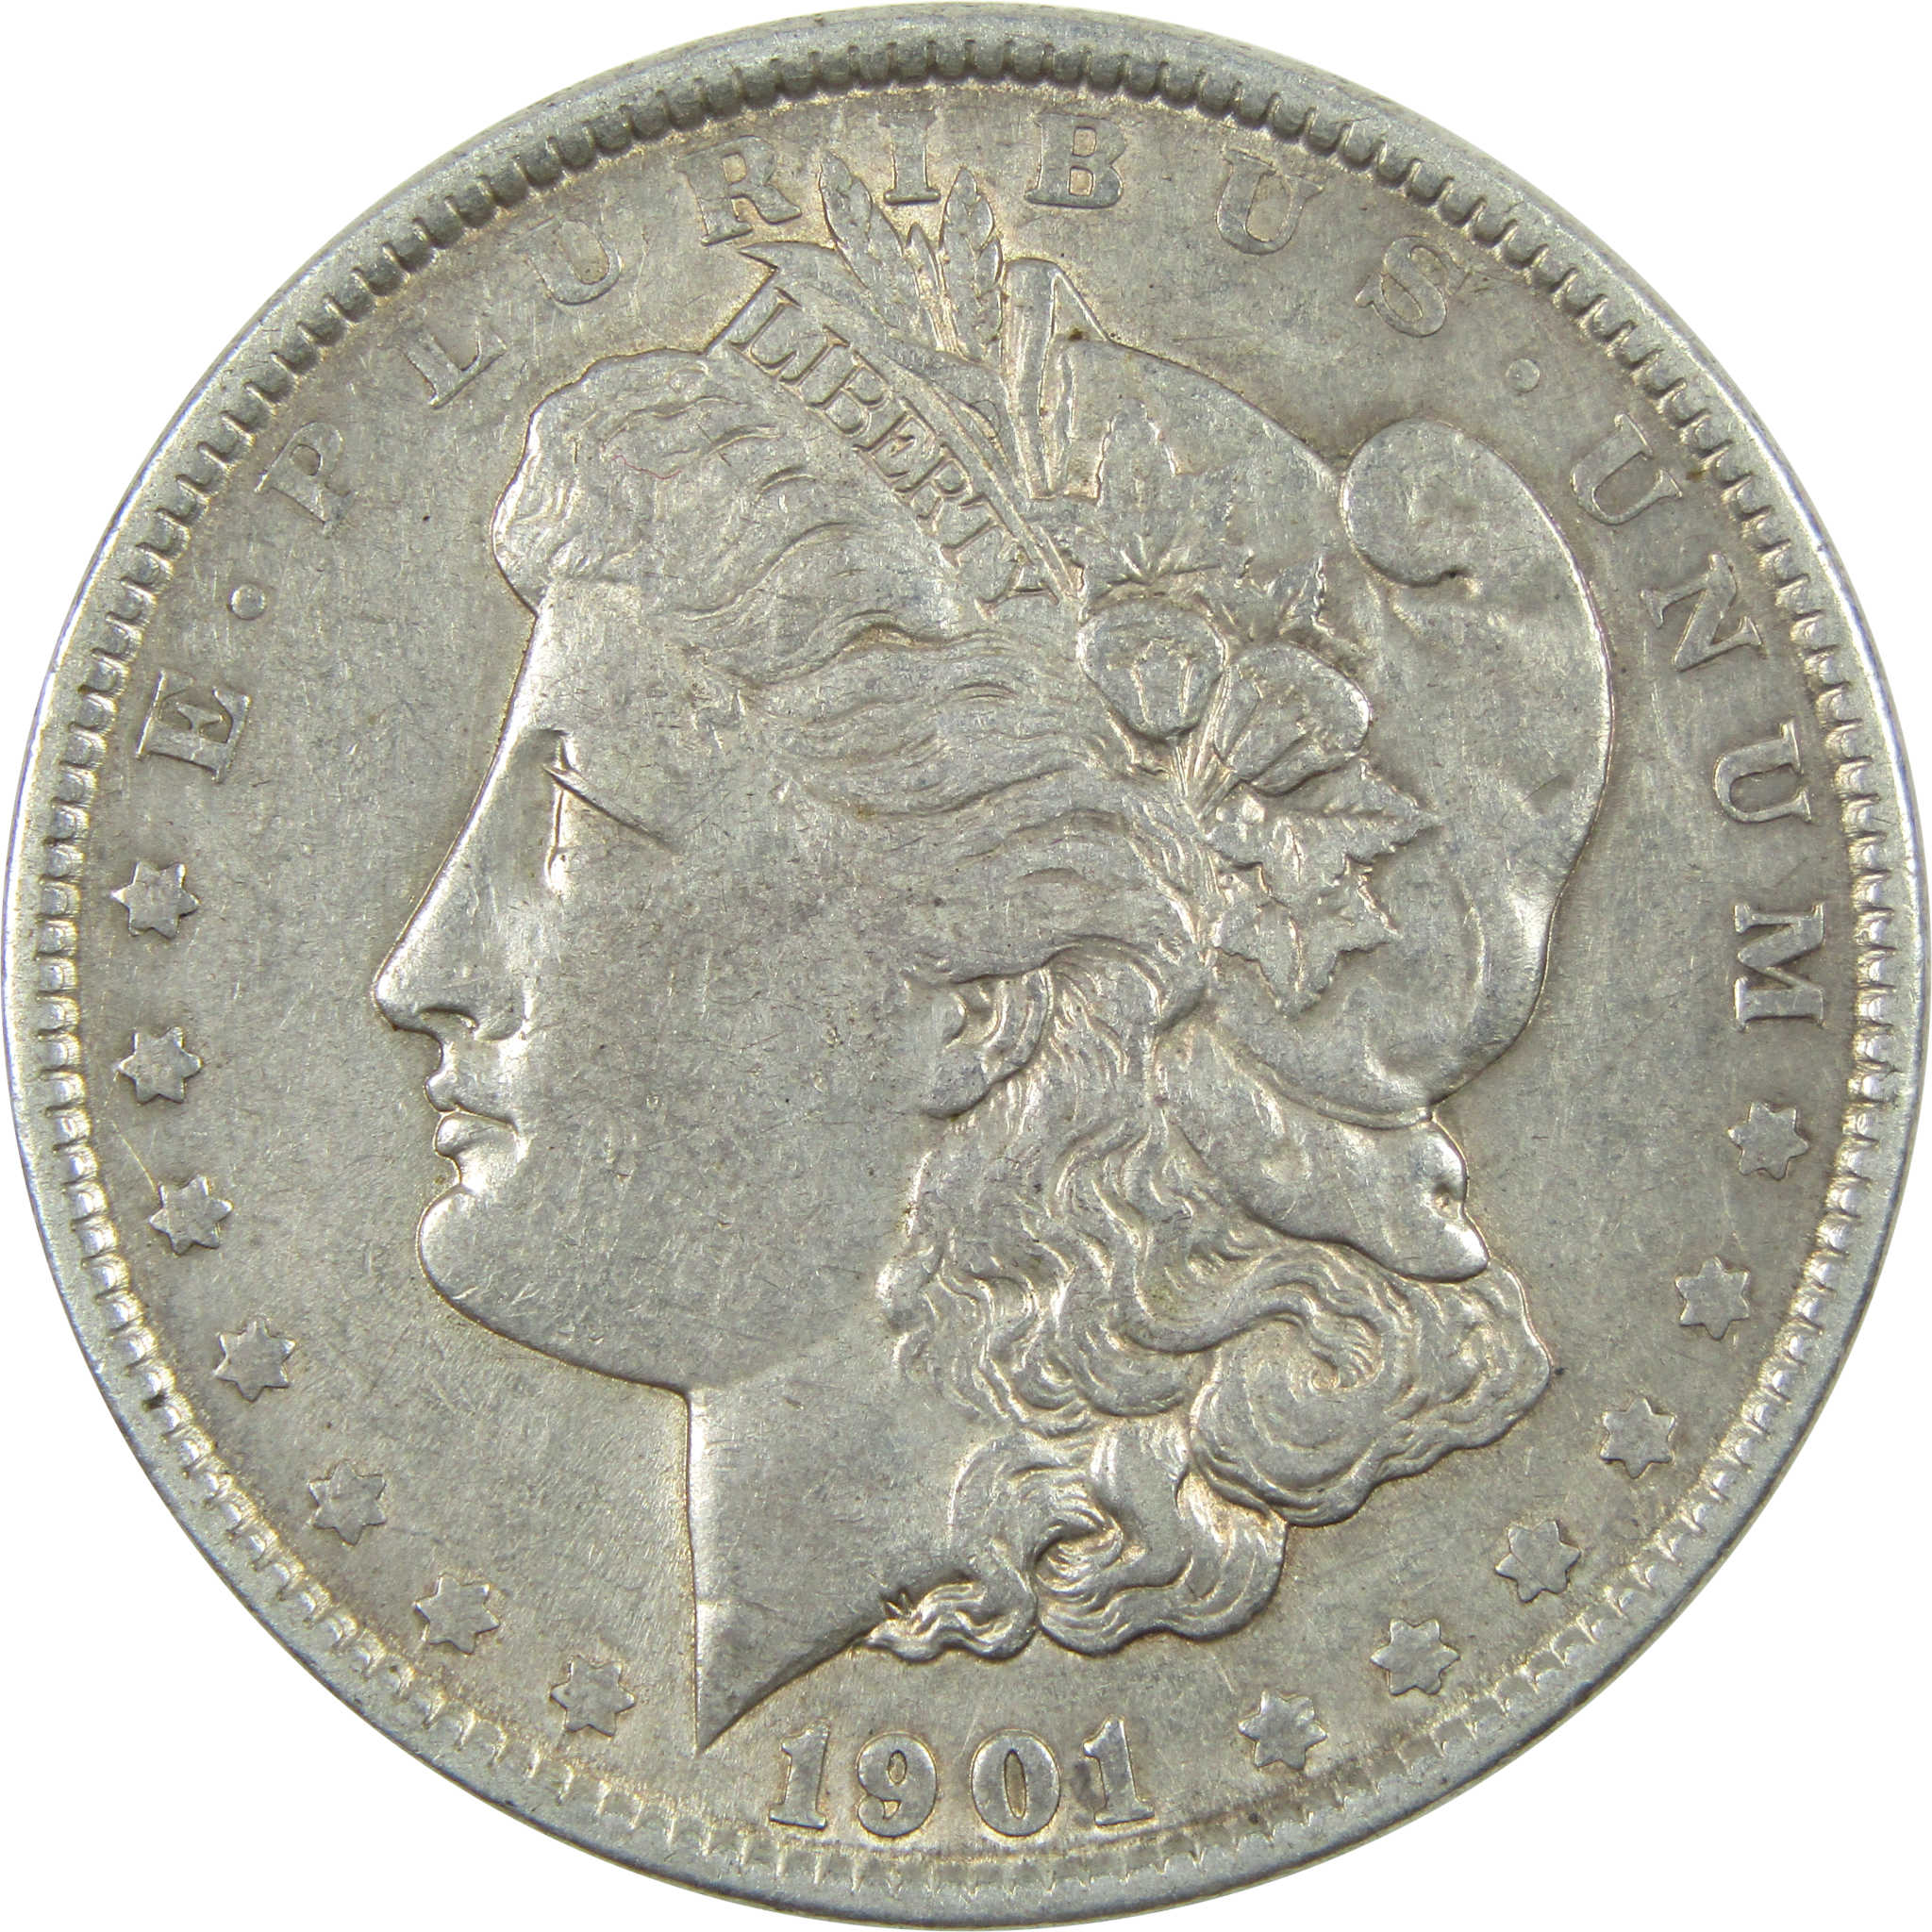 1901 Morgan Dollar XF EF Extremely Fine Details Silver $1 SKU:I14043 - Morgan coin - Morgan silver dollar - Morgan silver dollar for sale - Profile Coins &amp; Collectibles